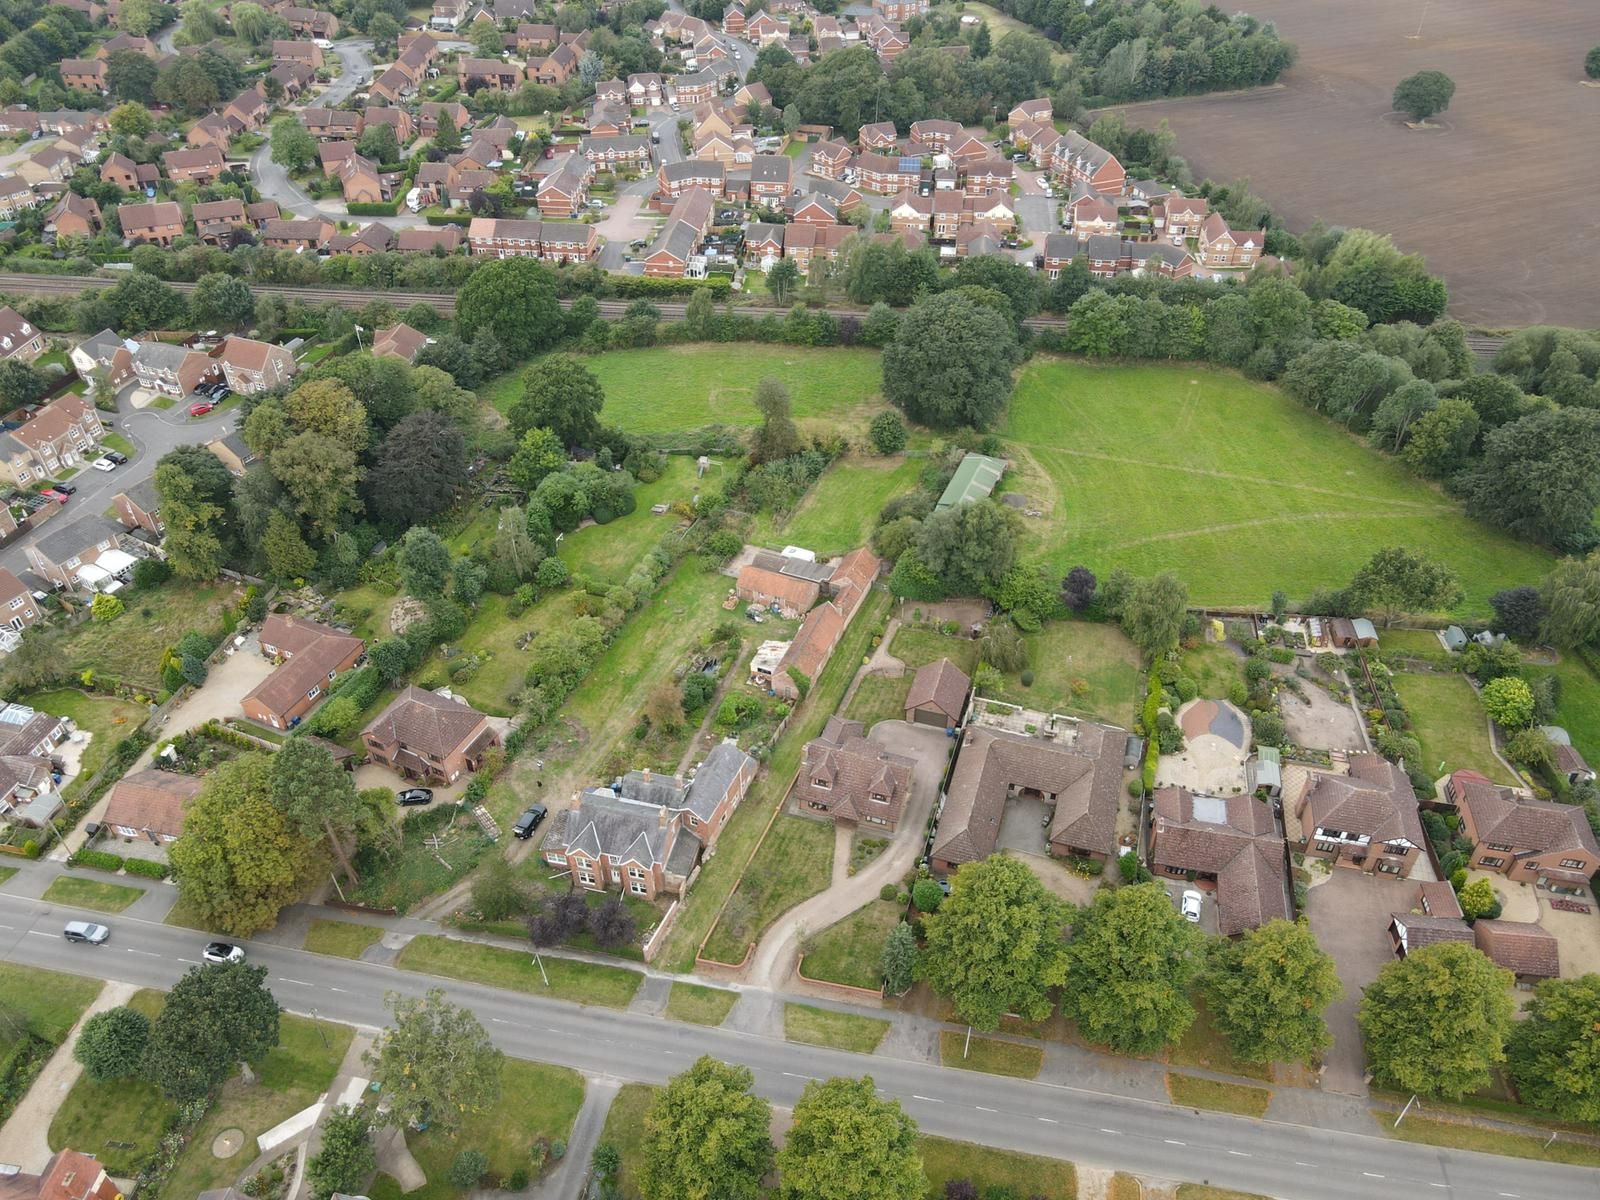 Planning Permission for Major Residential Developments - Fytche-Taylor Planning